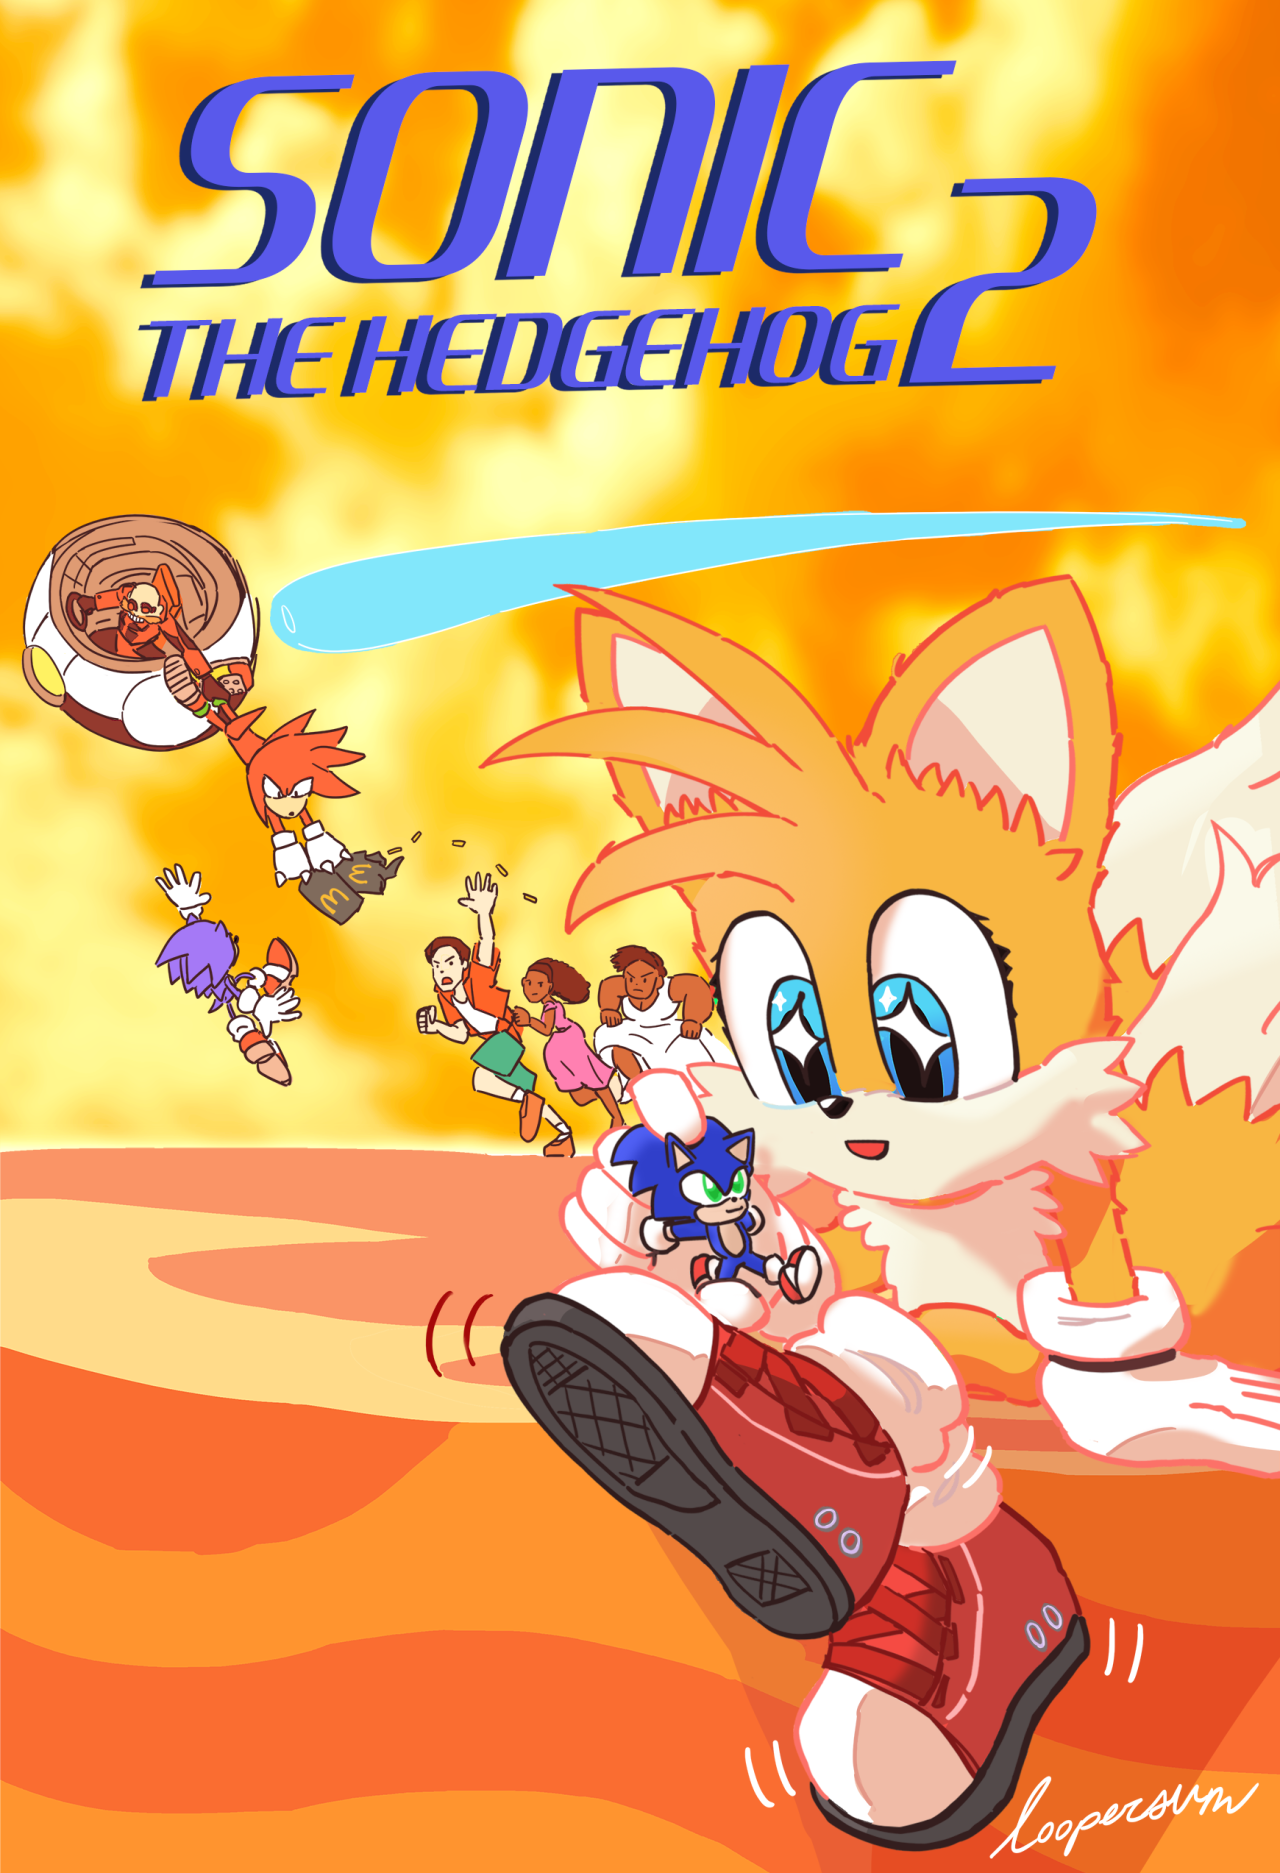 Tails gets his toy #tails #tails the fox  #miles tails prower #sonic #sonic the hedgehog  #sonic the hedgehog 2  #sonic movie 2 #knuckles#donut lord#tom#maddie#rachel#eggman#robotnik#mcdonalds